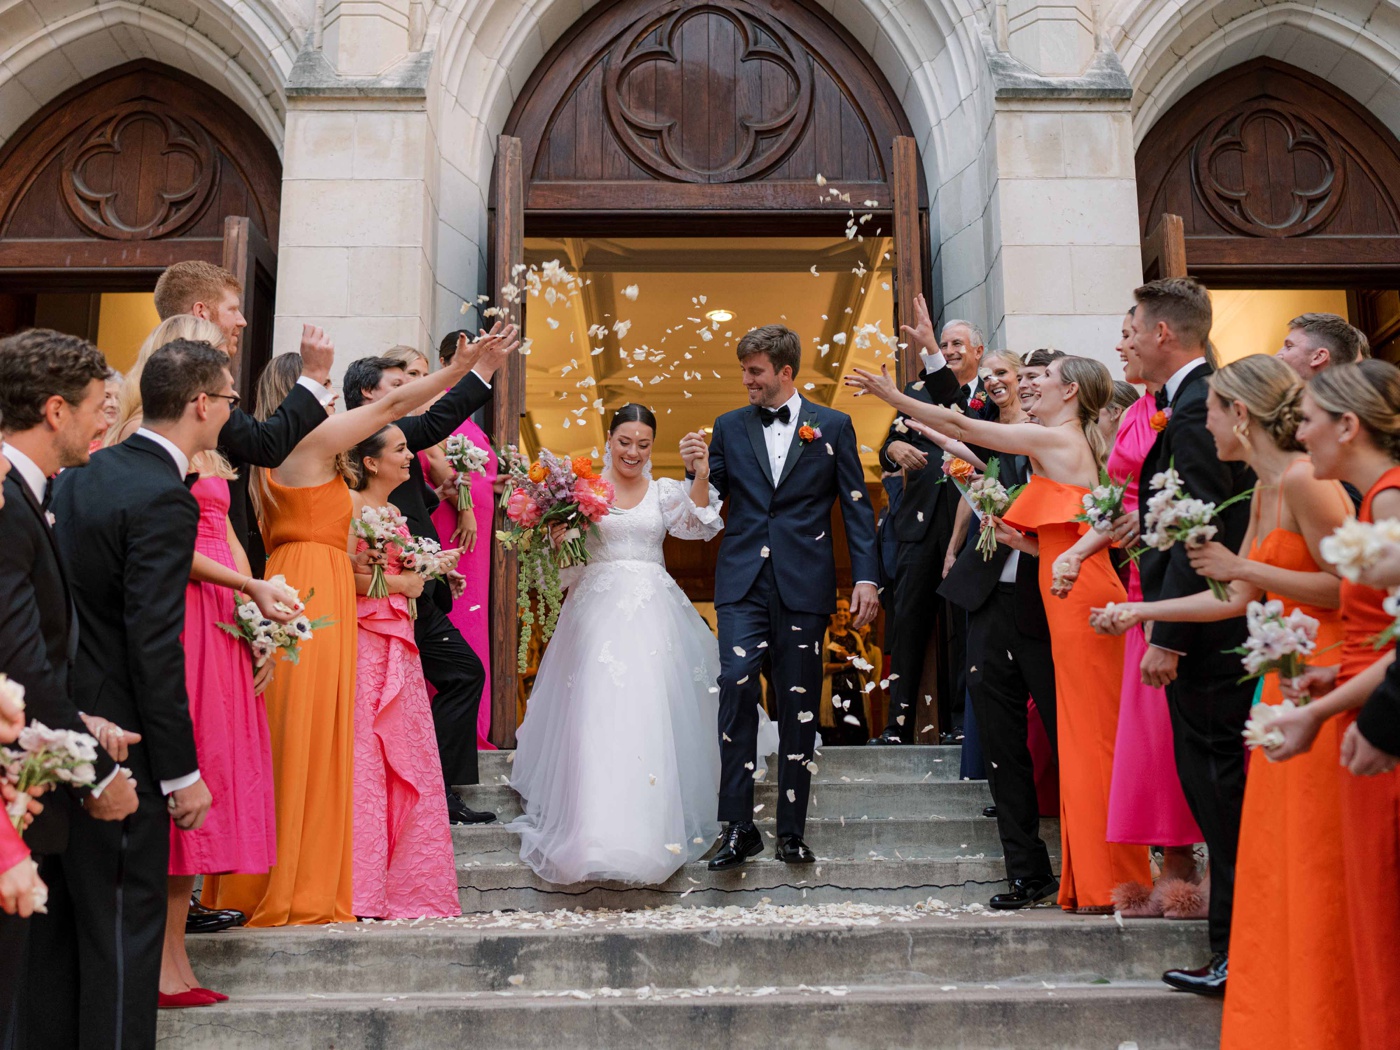 Wedding guests tossing flower petals on a bride and groom exiting their San Antonio ceremony